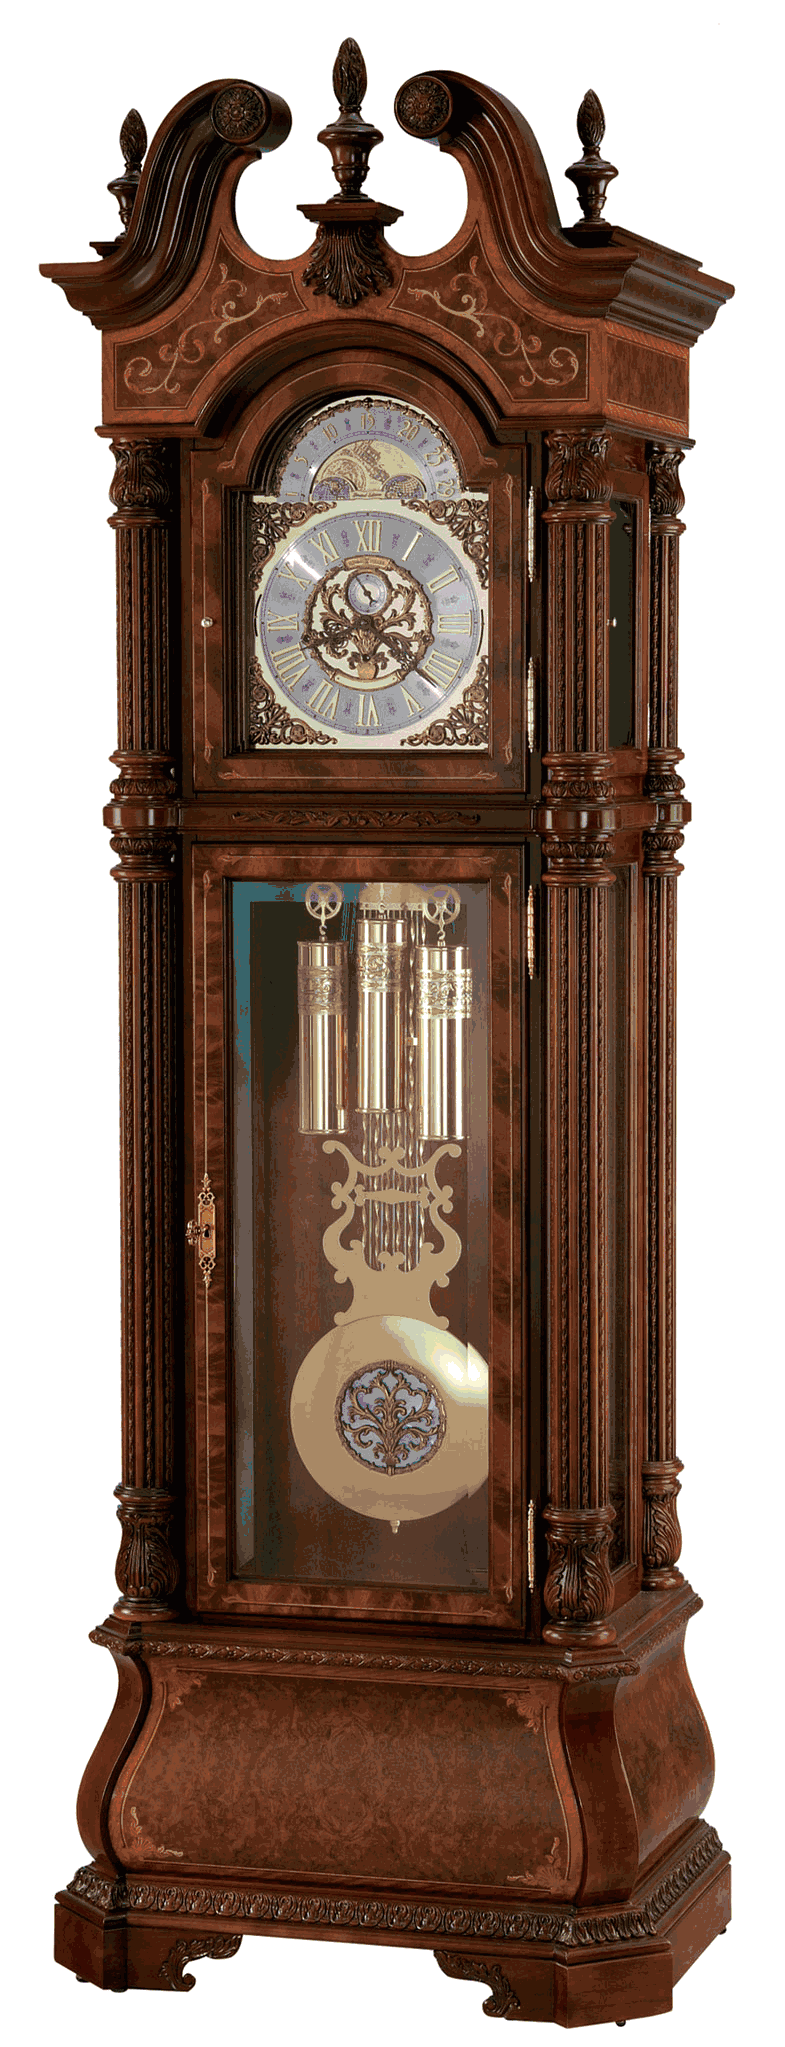 The J.H. Miller Grandfather Clock by Howard Miller